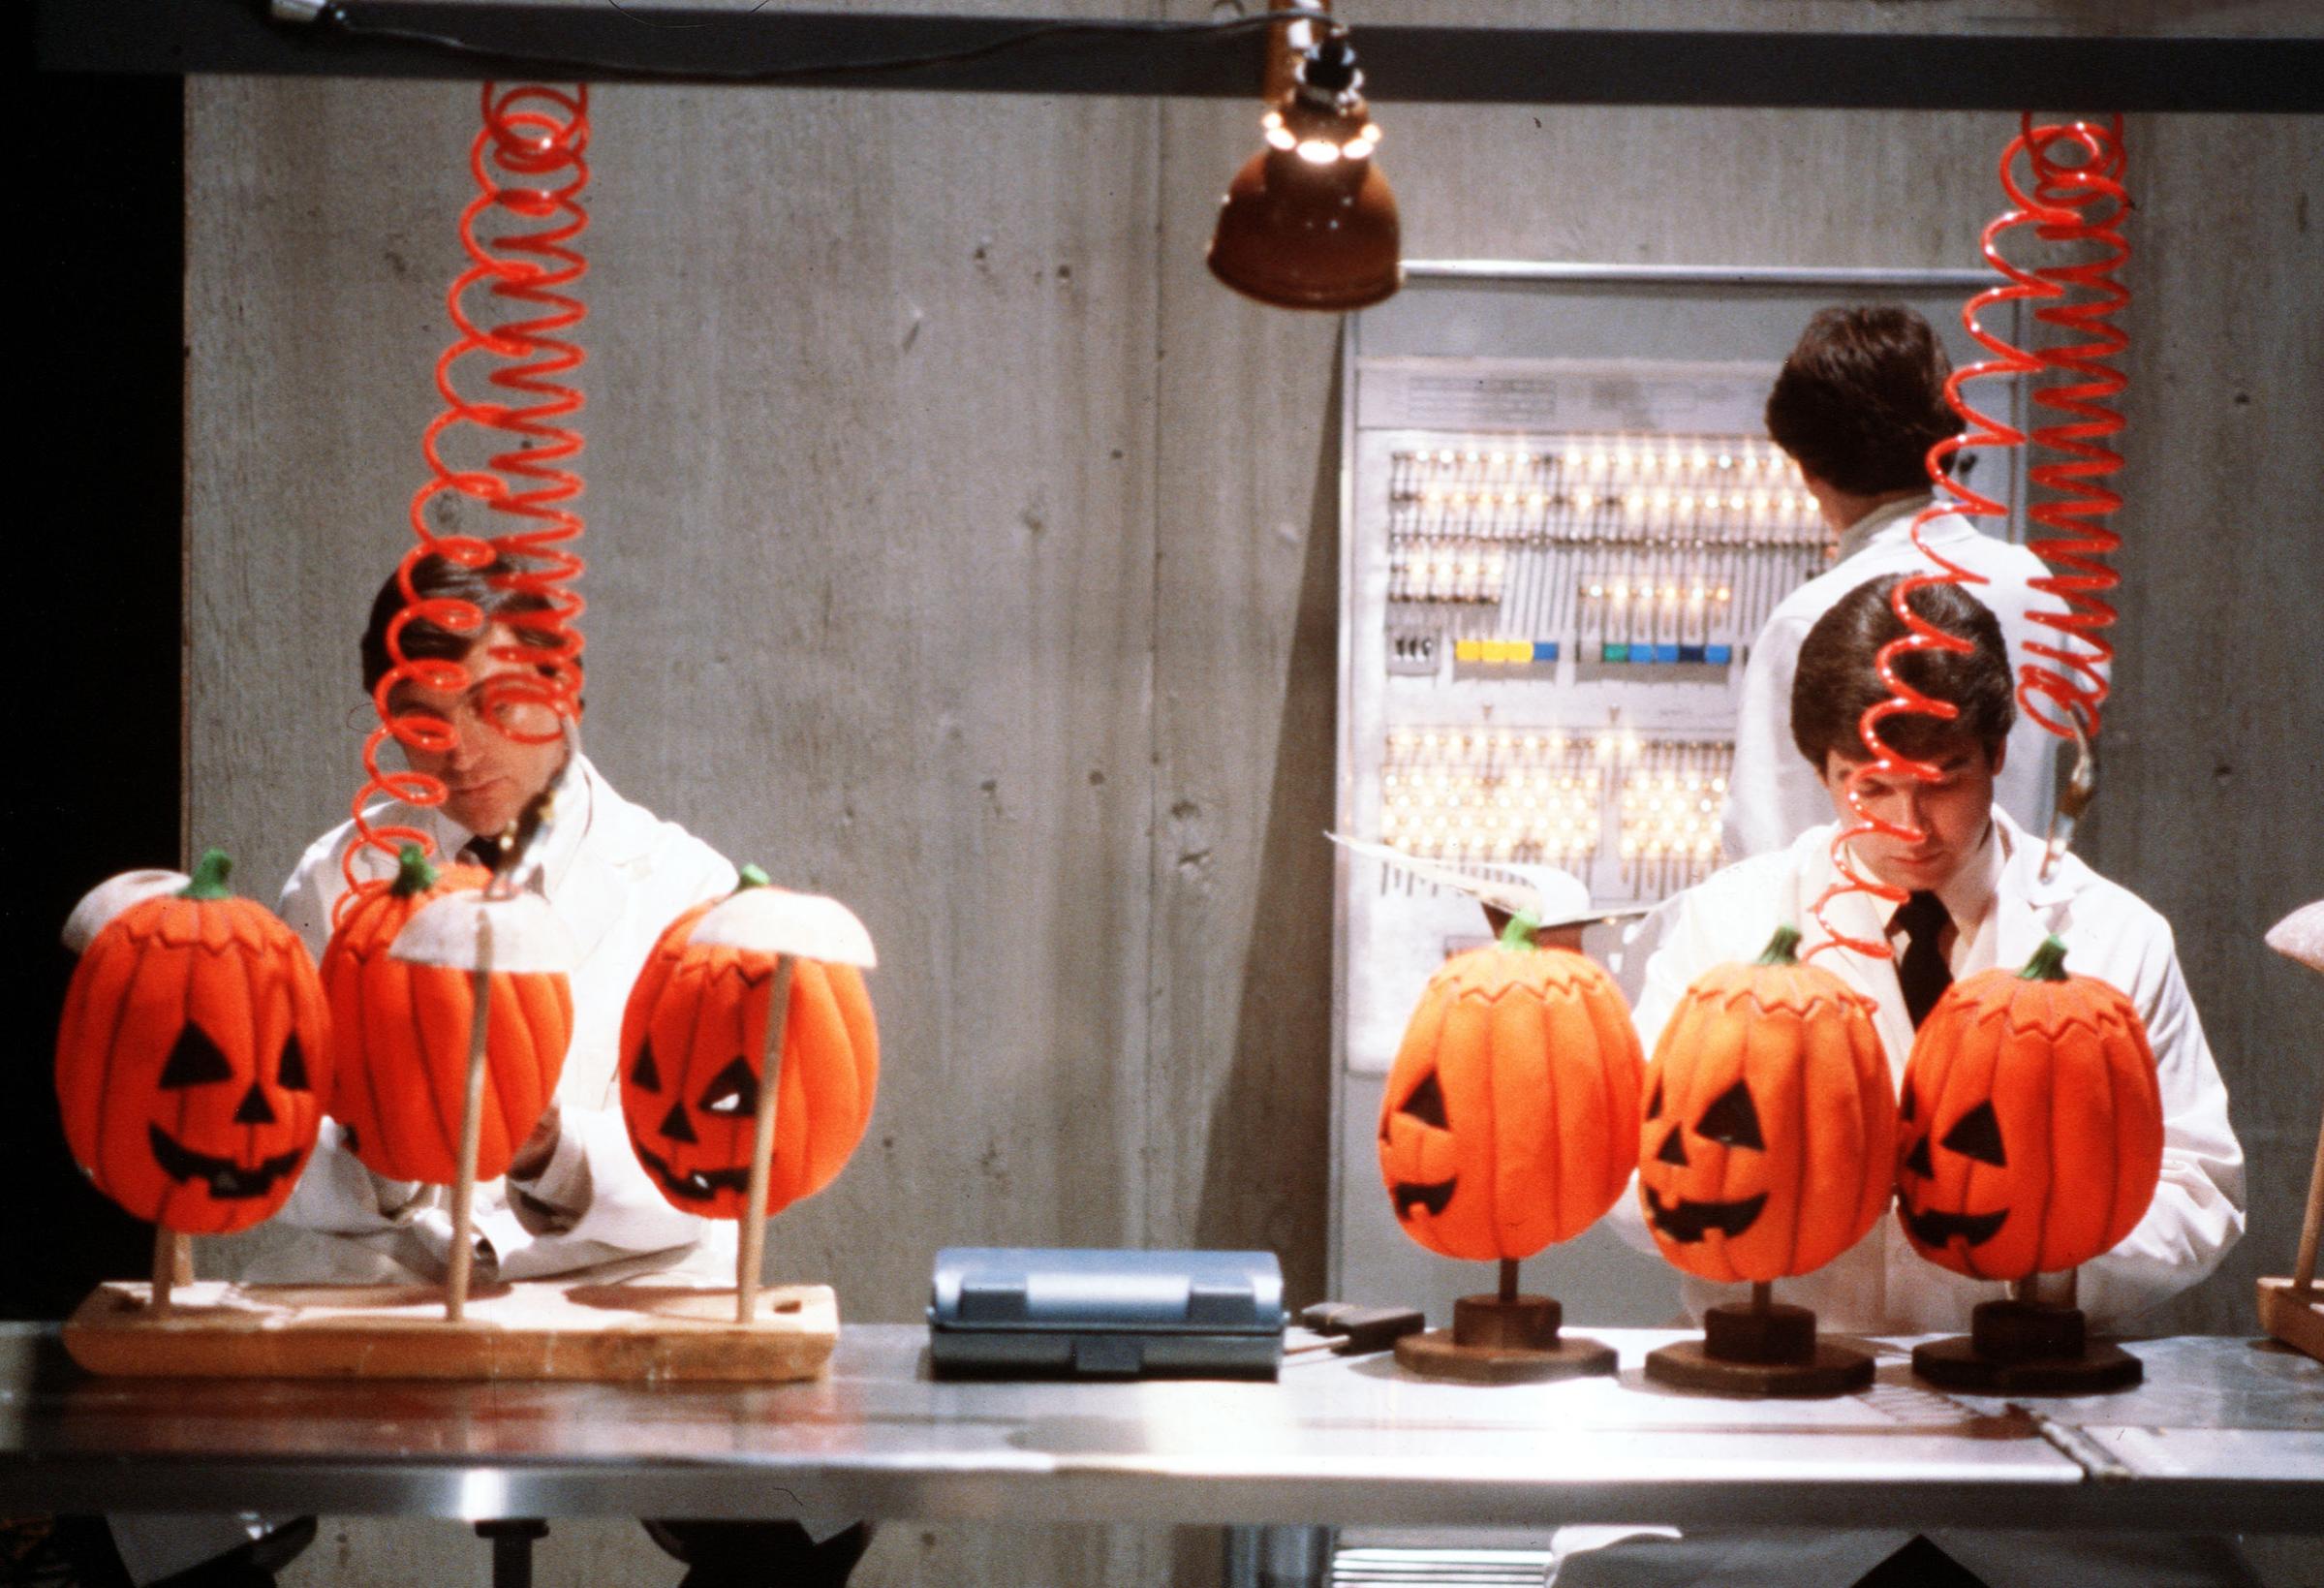 A scene from "Halloween III - Season Of The Witch".